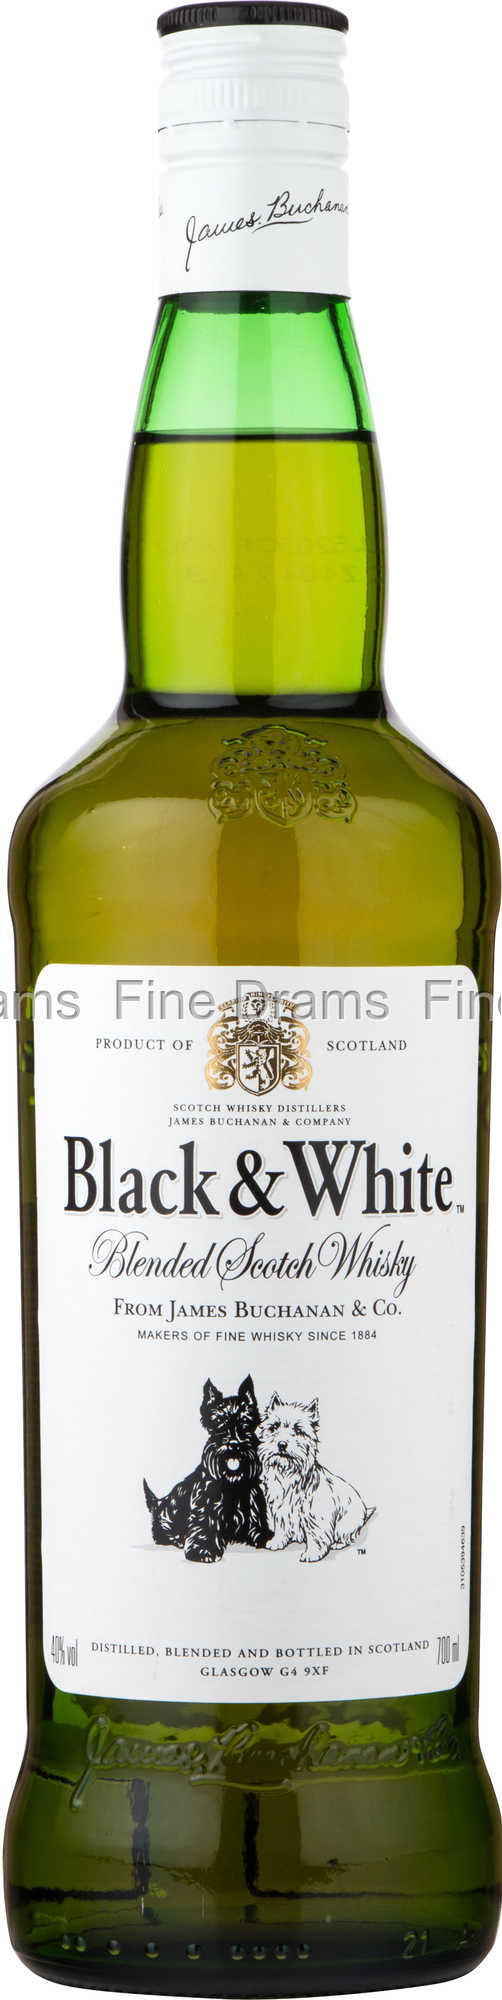 Black And White Whisky : vintage Black & White Scotch Whisky Dogs Westie : Black & white special blended scotch whisky.